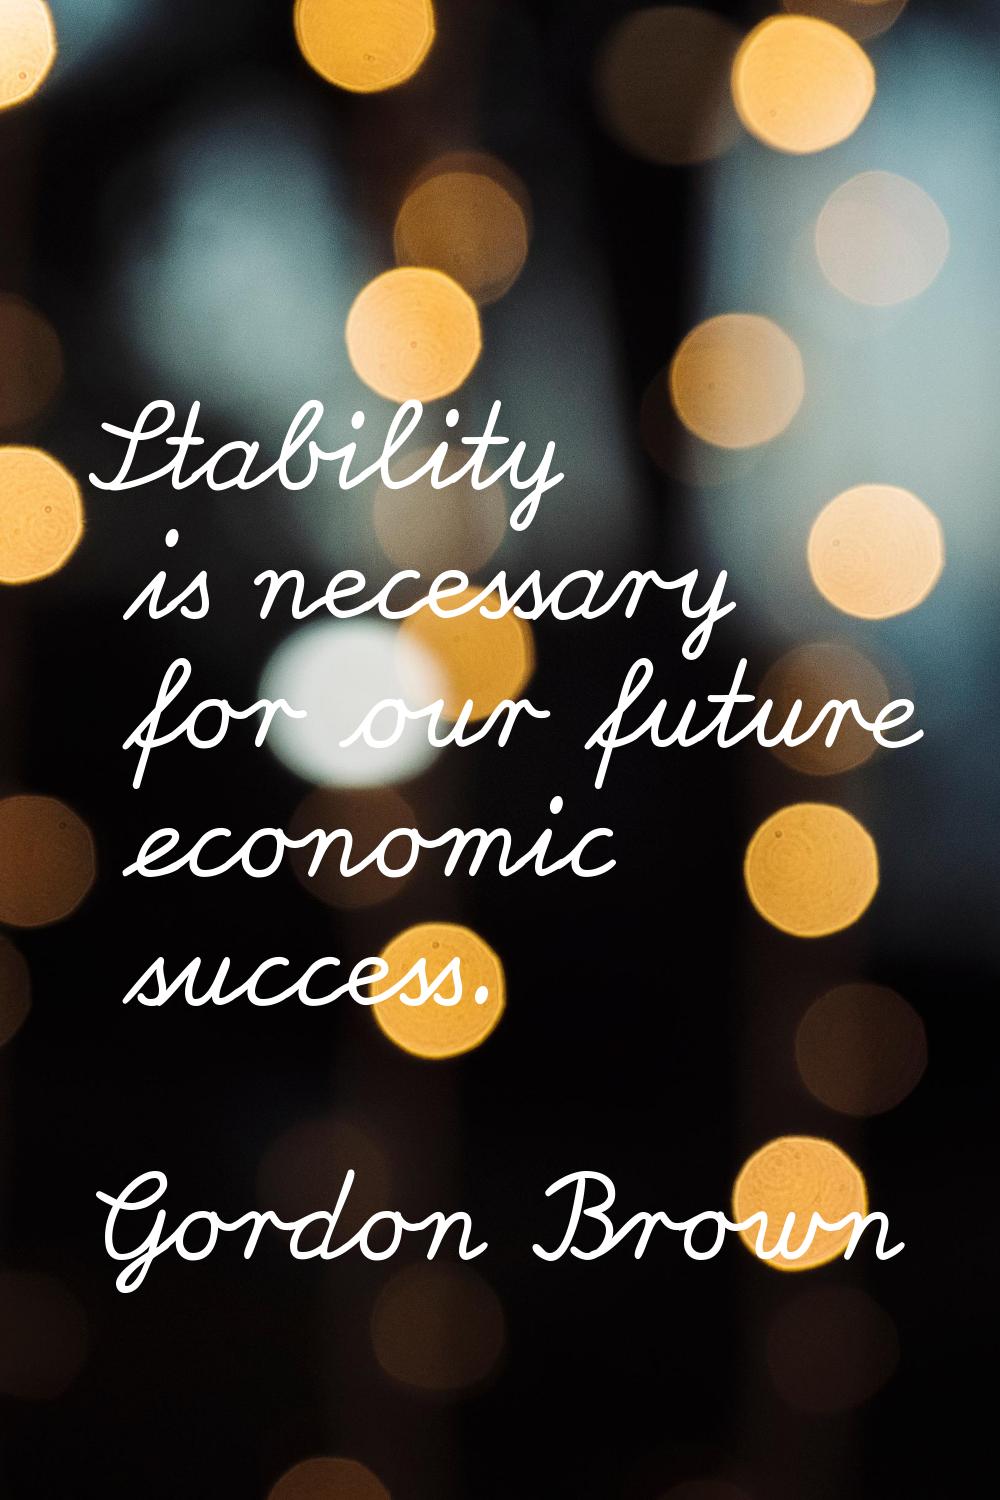 Stability is necessary for our future economic success.